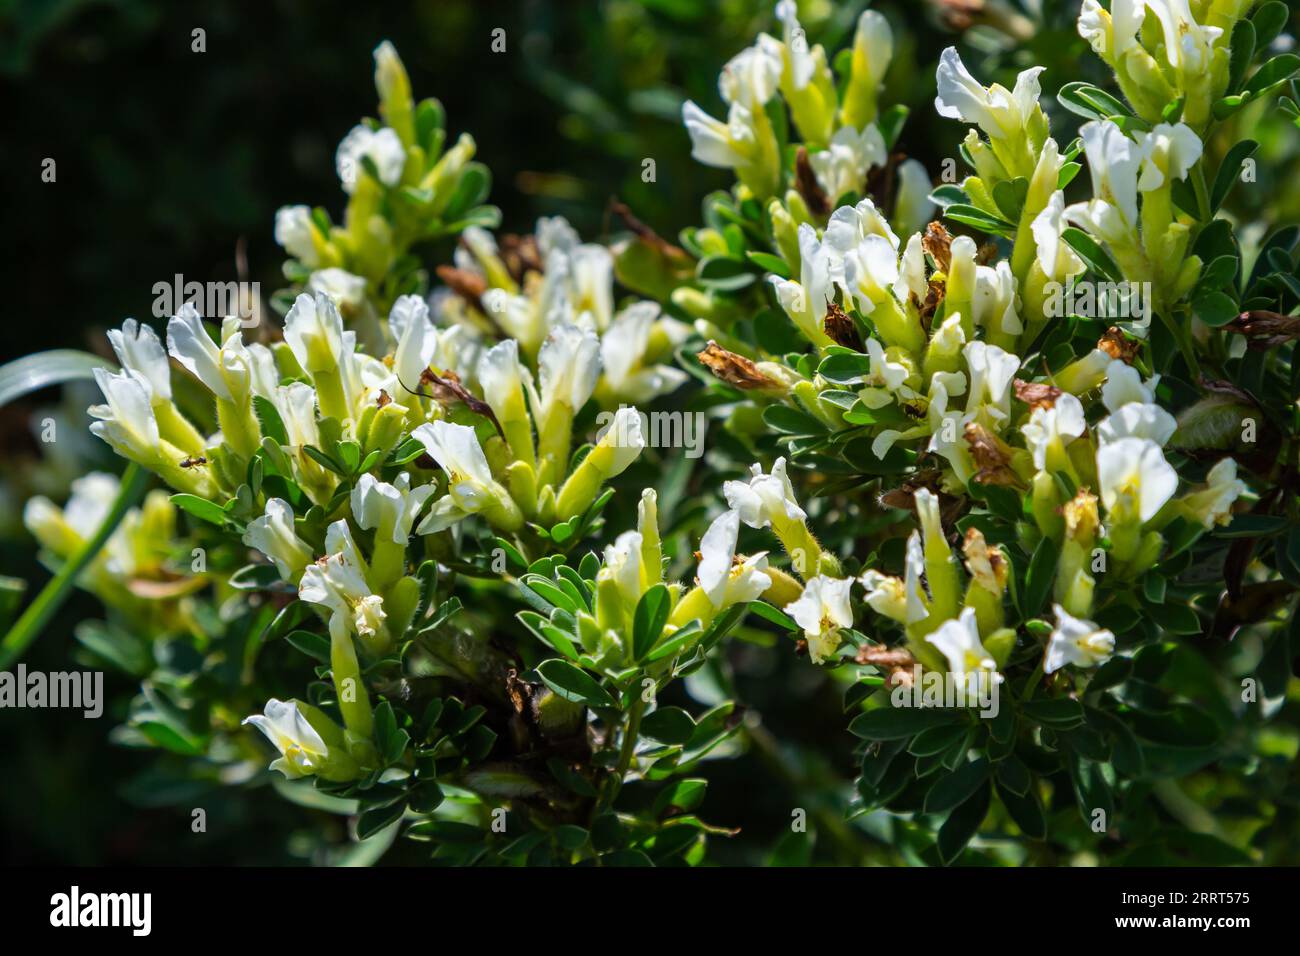 In the spring Chamaecytisus ruthenicus blooms in the wild. Stock Photo